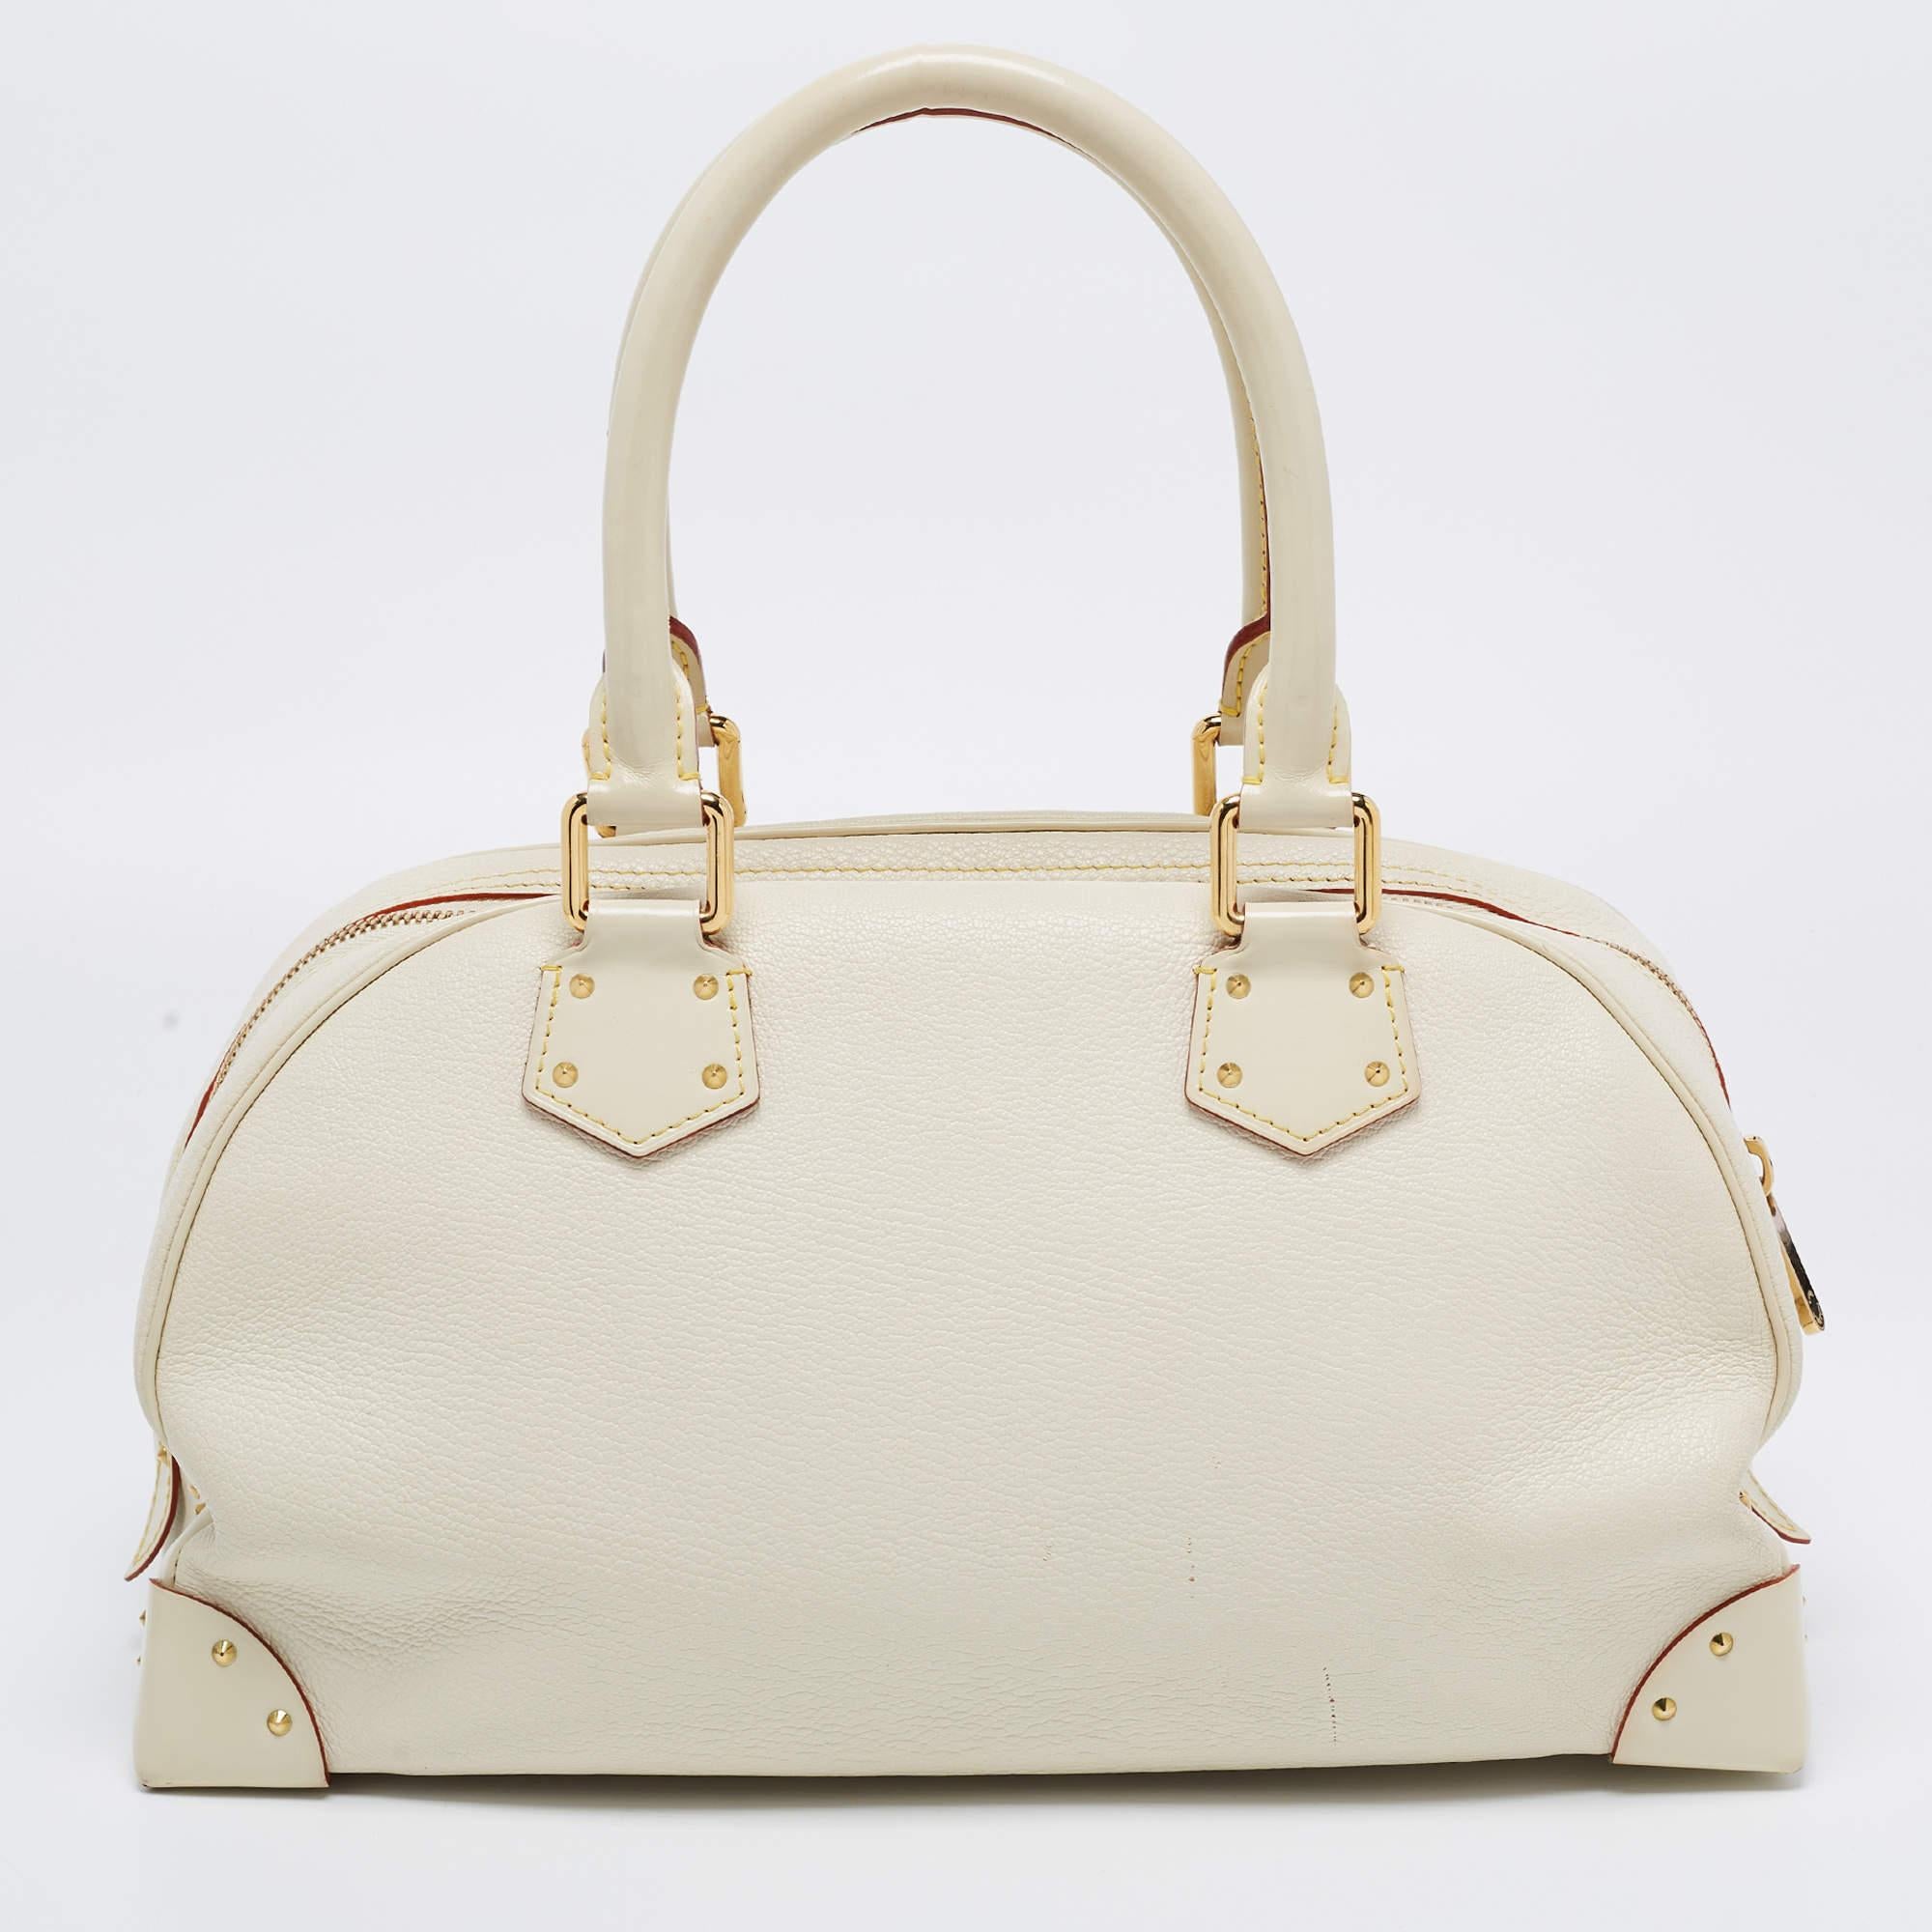 This limited edition Louis Vuitton bag is the perfect everyday bag. Made from ivory Suhali leather, it has a front flap pocket, gold-tone metal accents, and two top handles.

